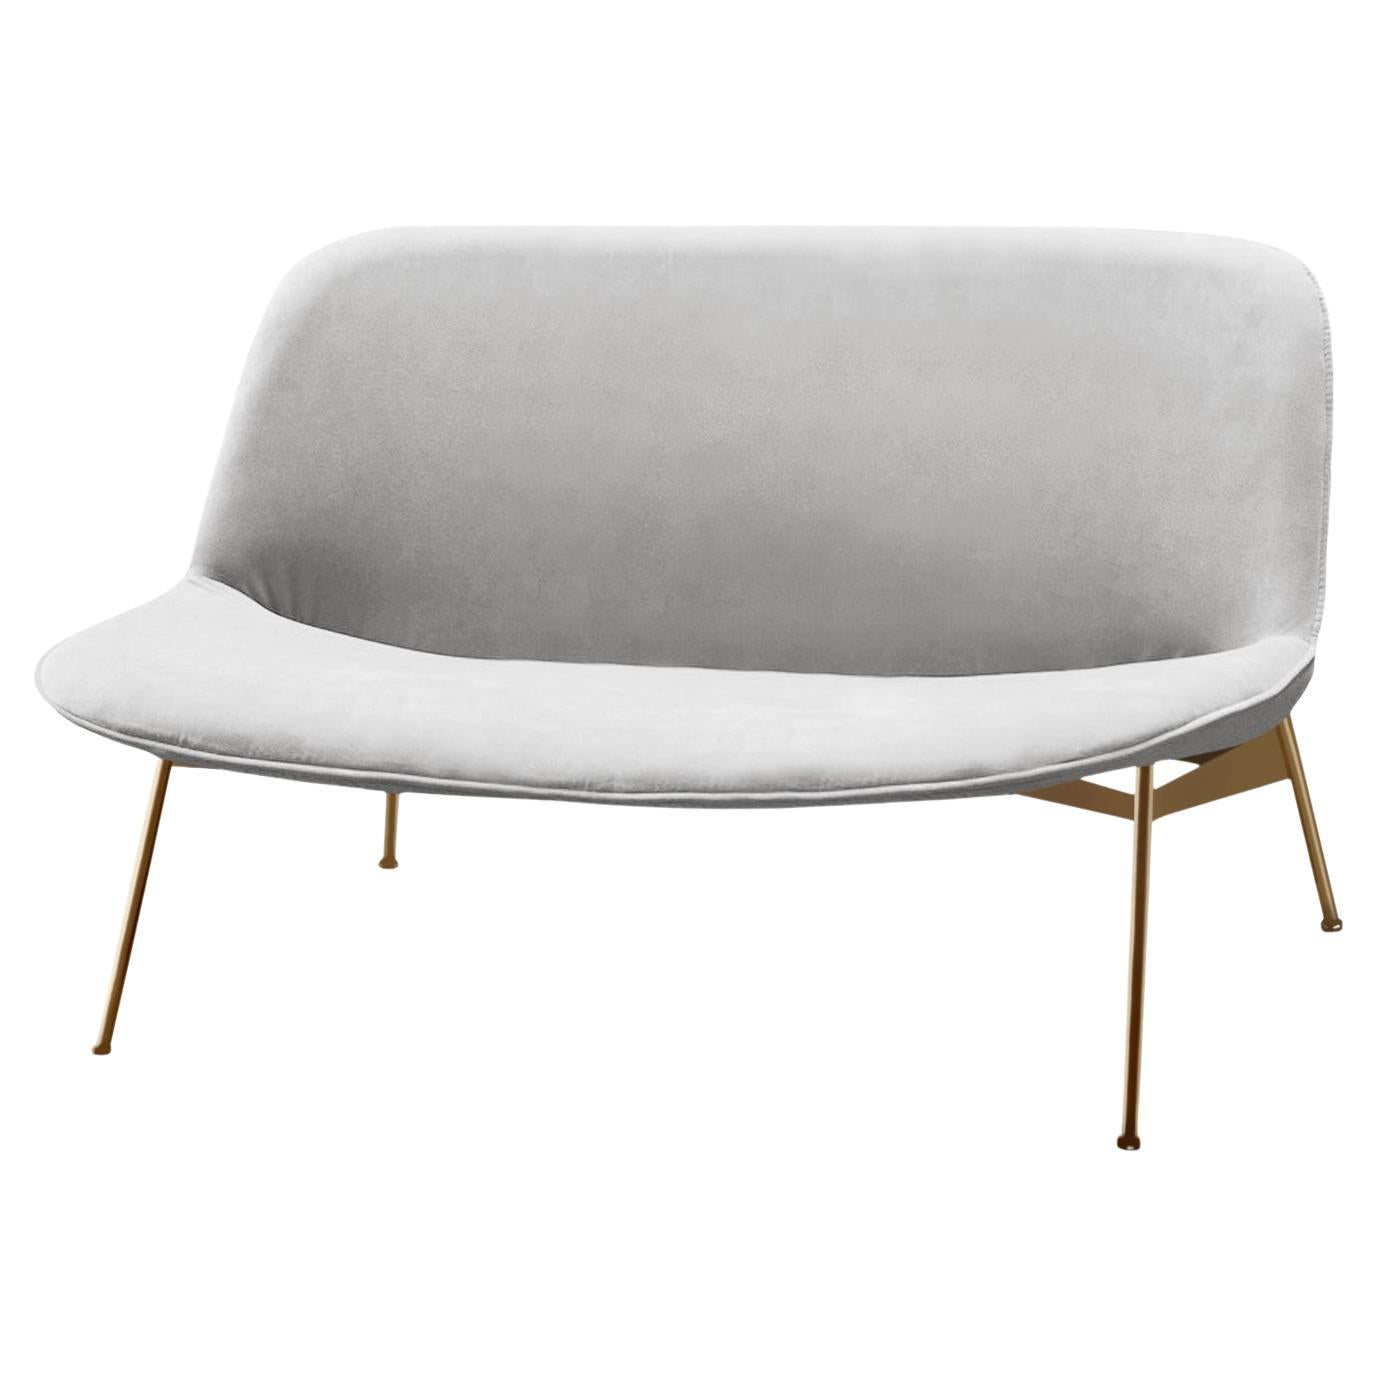 Chiado Sofa, Clean Powder, Large with Aluminium and Gold For Sale